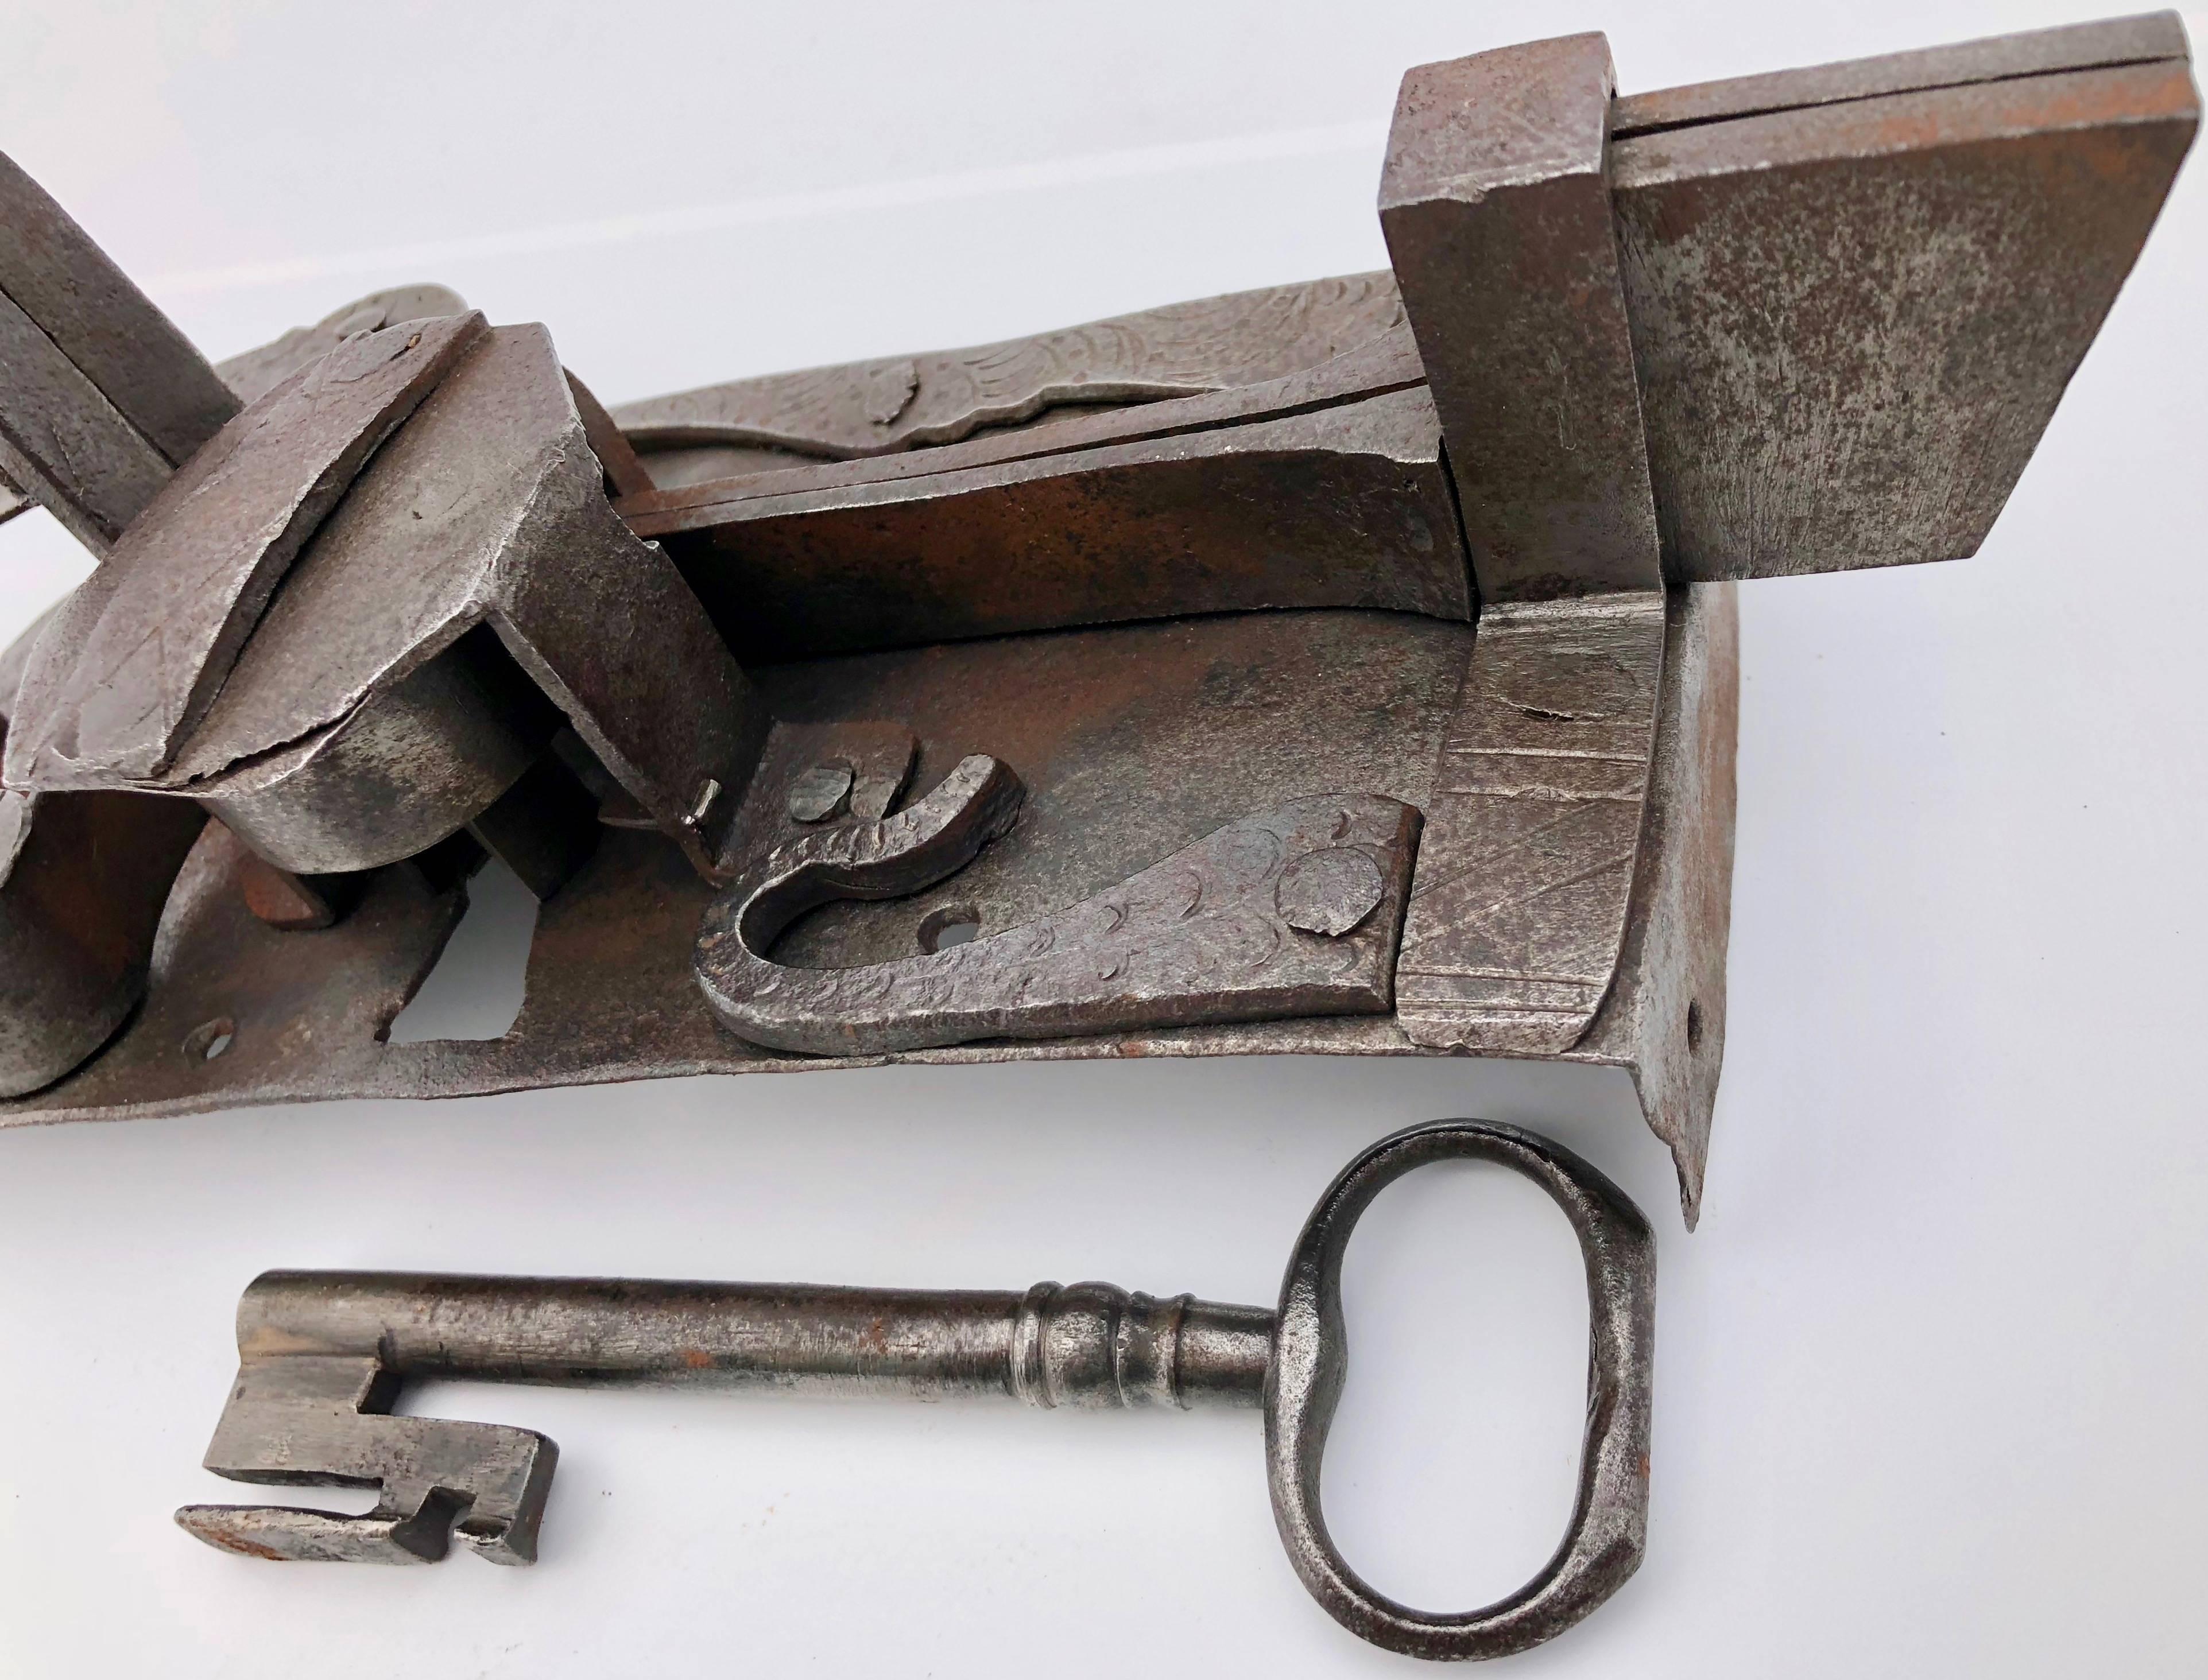 This Louis XVI French hand-wrought locking latch with incised decorations and it's own forged key is a beautiful piece. The latch operates by a lever on the front and by the key from the back. This decorated lock was likely used for a special trunk